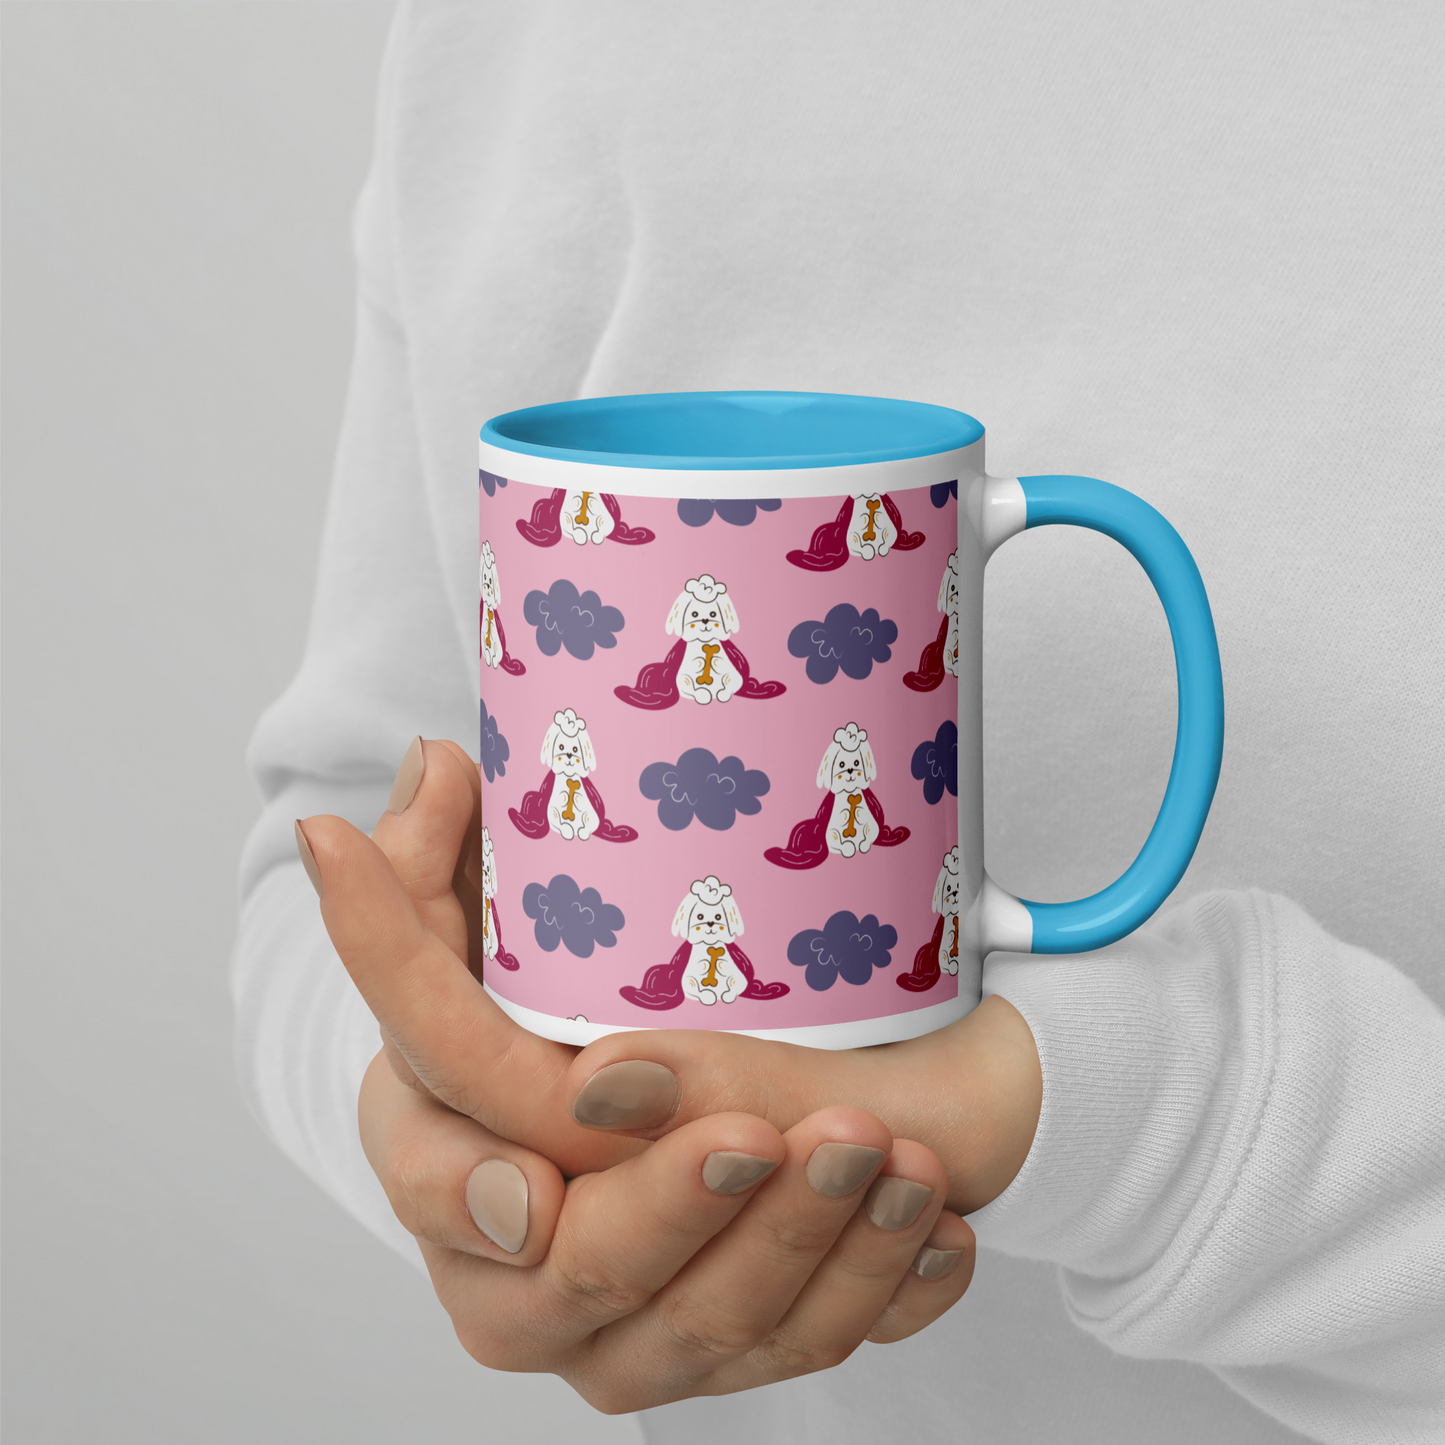 Cozy Dogs | Seamless Patterns | White Ceramic Mug with Color Inside - #10